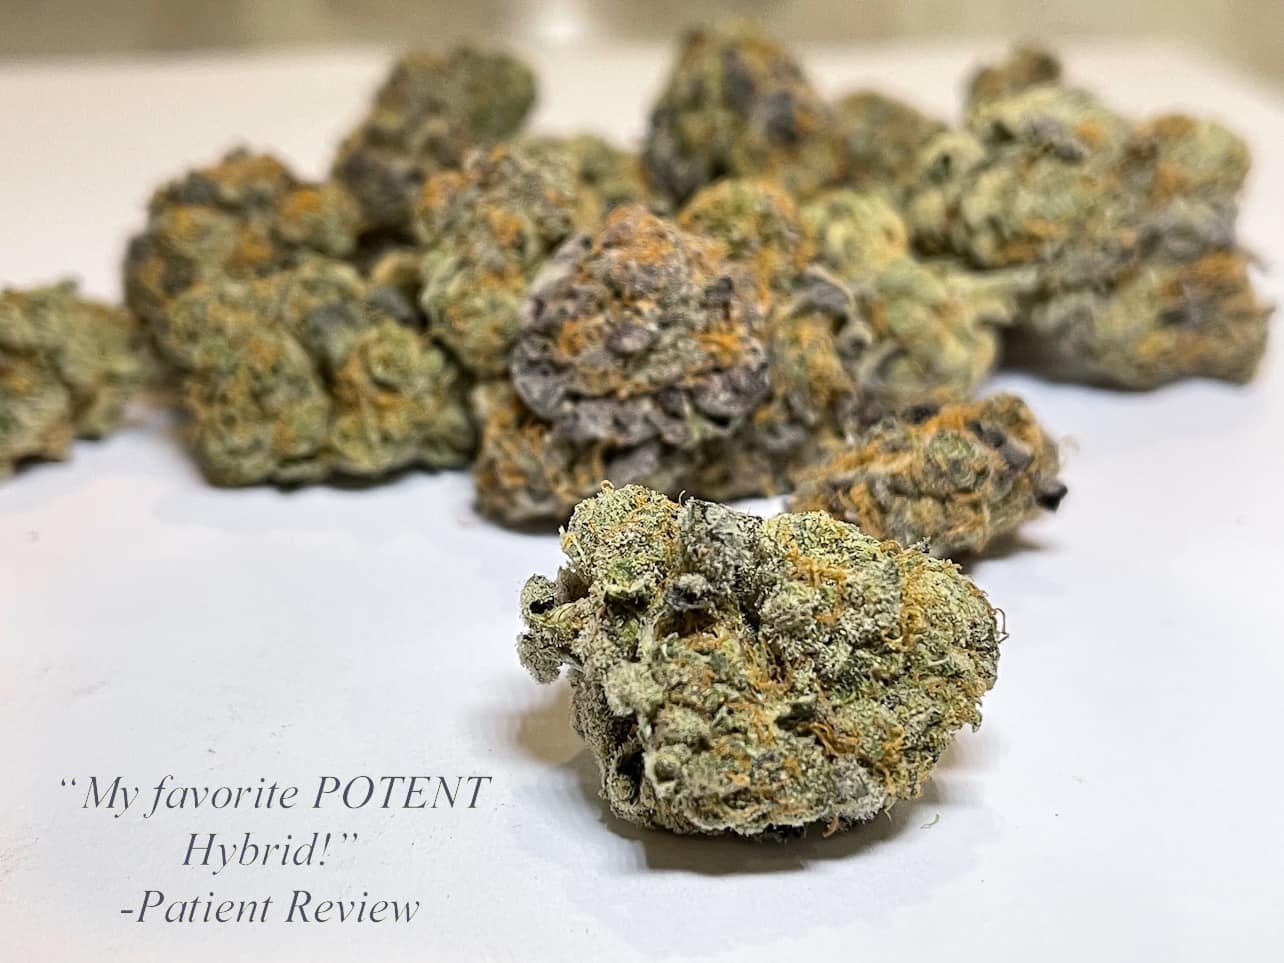 RaceFuel my favorite potent hybrid from tucson